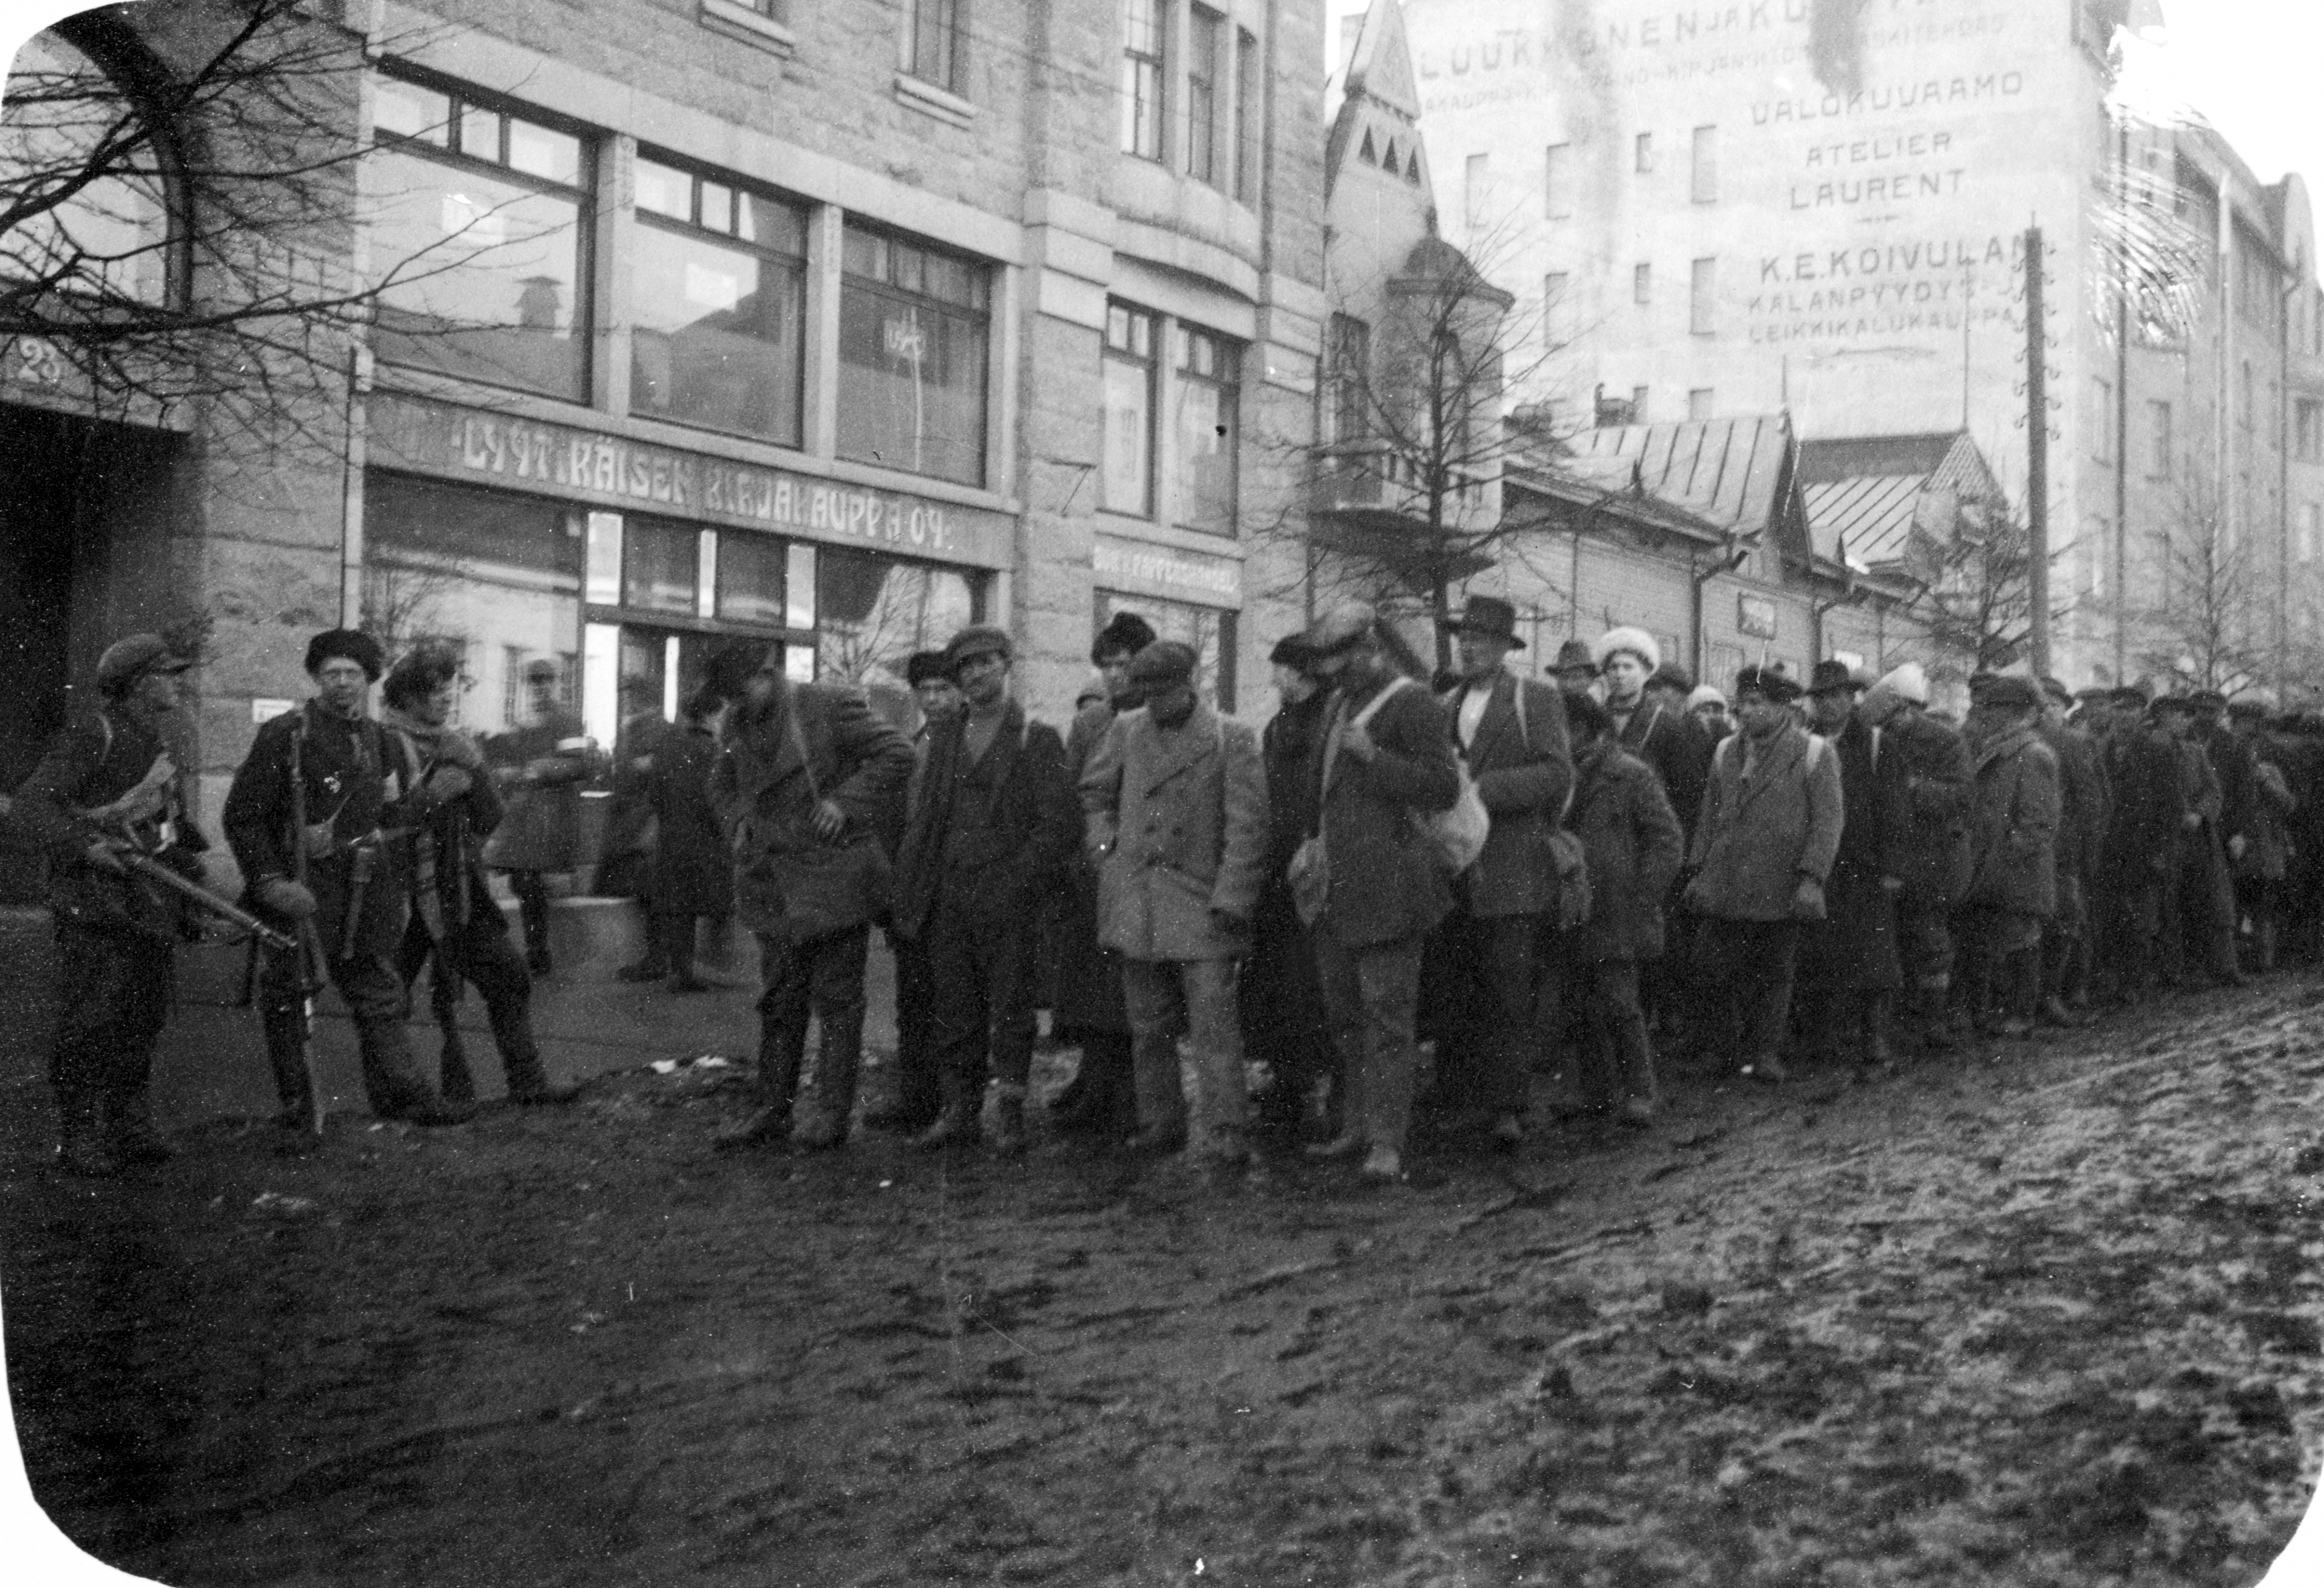 Captured red in Tampere (26364615374) - The location is Hämeenkatu 25. CC-BY Tampere 1918, photographer unknown, Vapriik photo archive. Finnish Civil War 1918, Photographer unknown, Vapriikki Photo Archives.